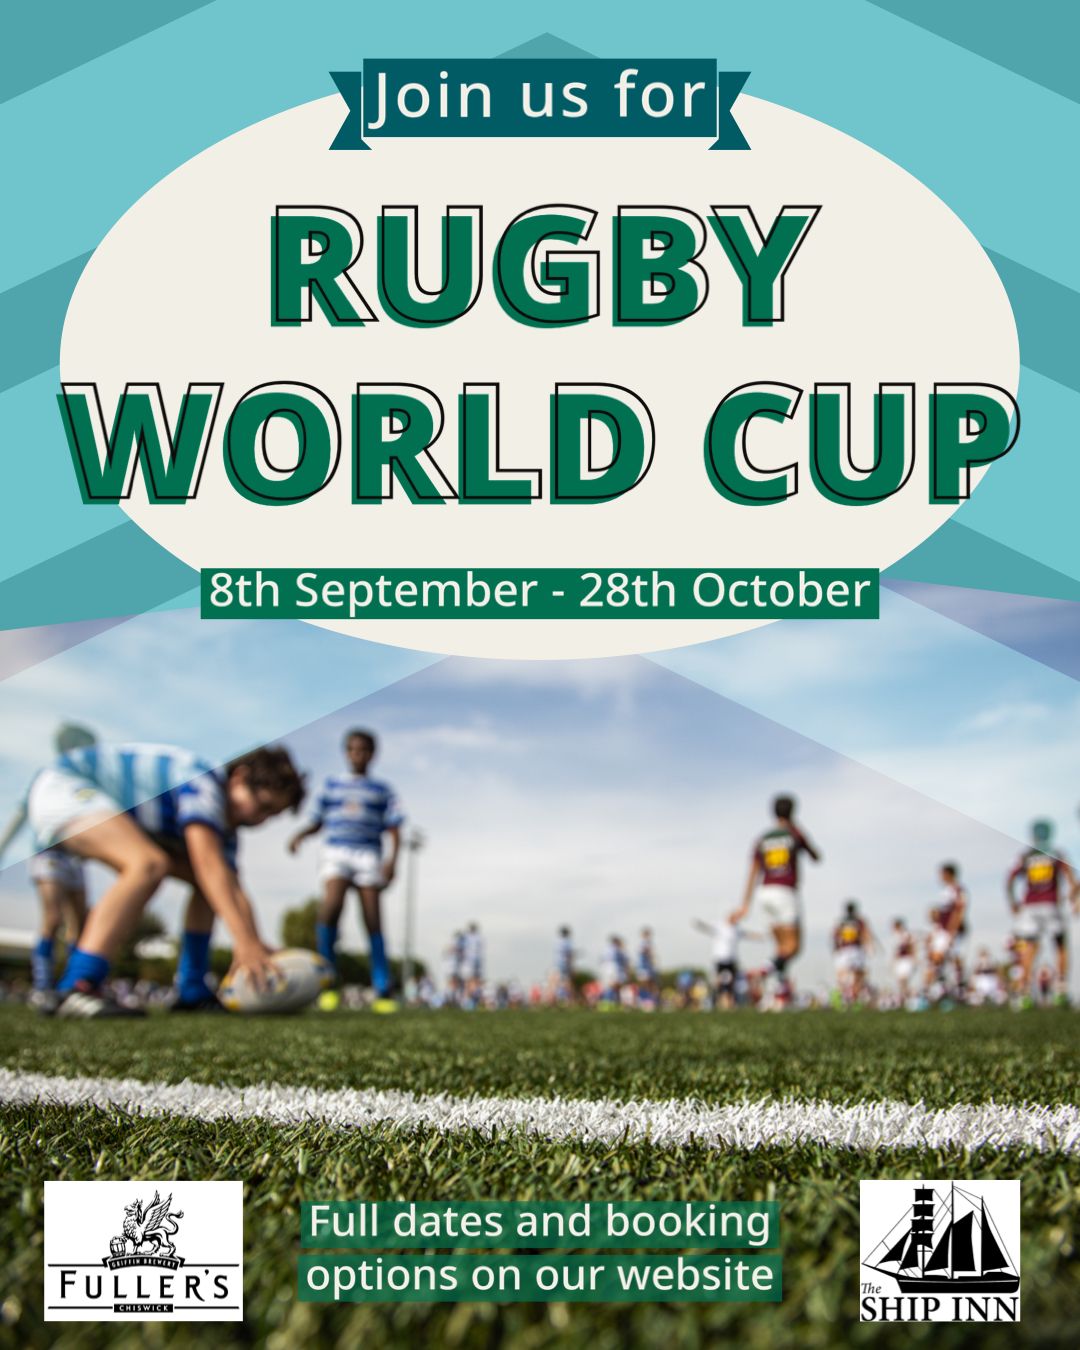 Rugby World Cup - The Ship